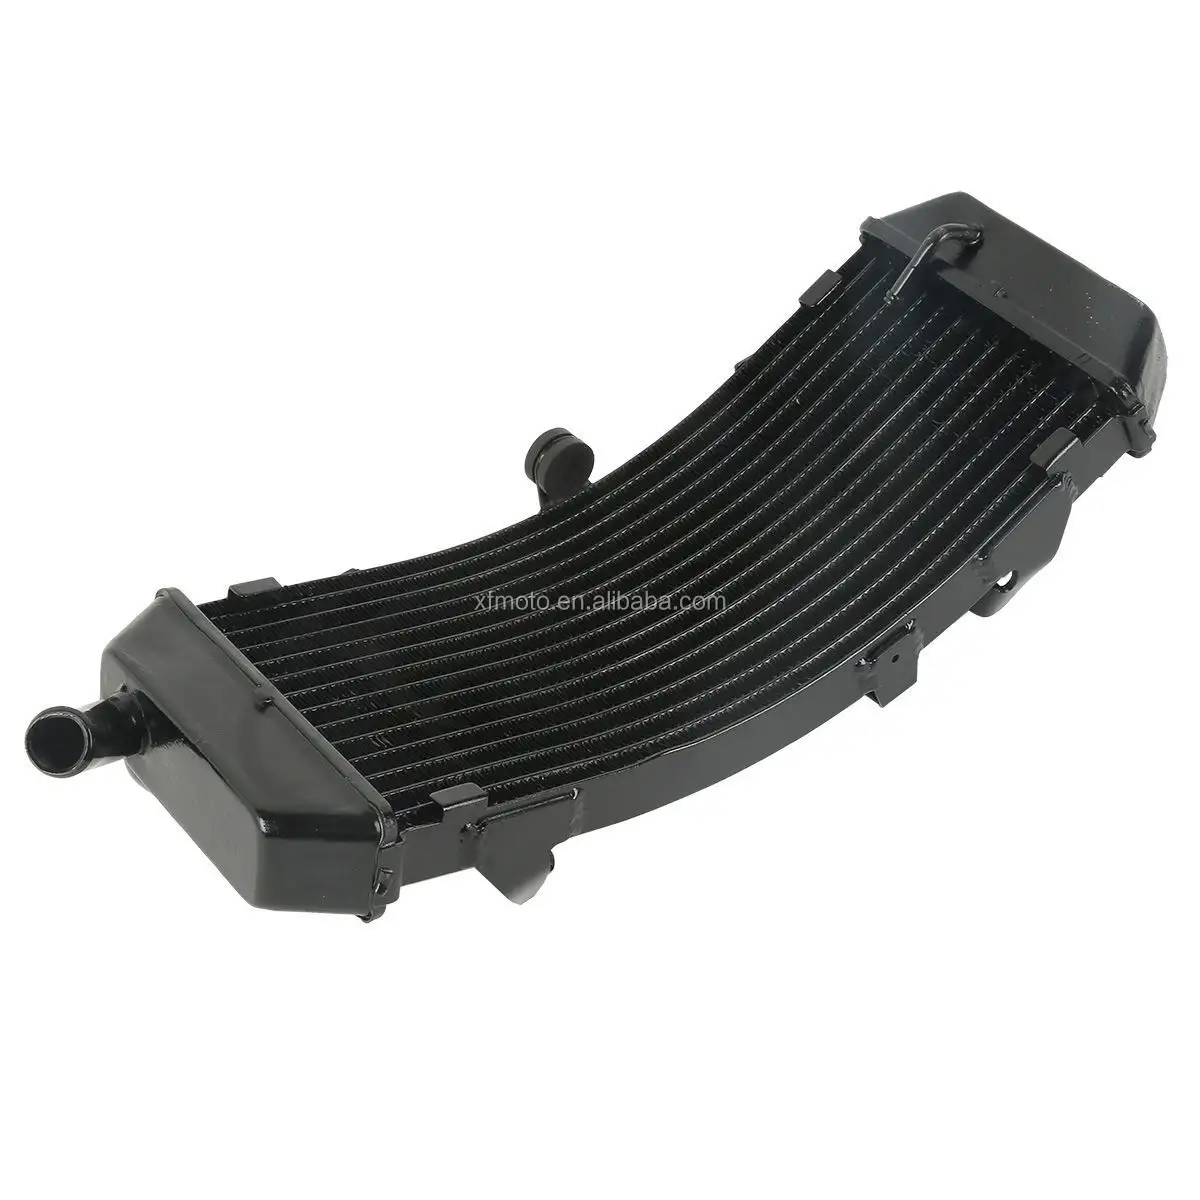 TCMT Factory XF-362 Replacement Cooler Radiator For Yamaha XP500 TMAX T-MAX 500 2008-2011 2009 2010